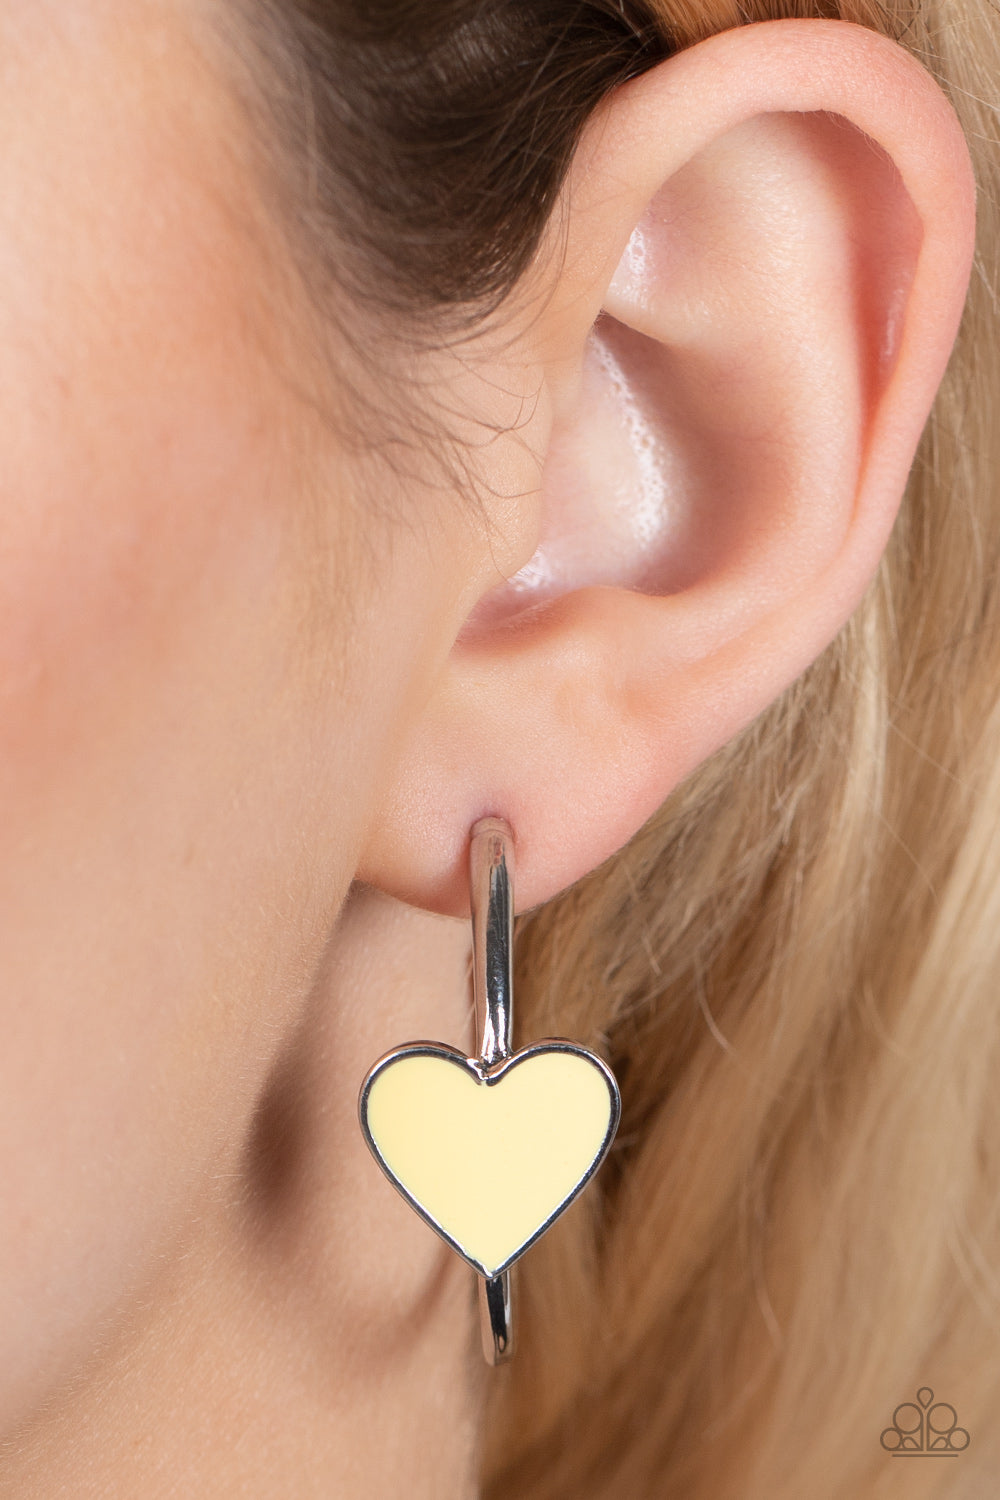 Kiss Up Yellow Hoop Earring - Paparazzi Accessories  A charming Illuminating heart adorns the front of a classic silver hoop resulting in a whimsical fashion. Earring attaches to a standard post fitting. Hoop measures approximately 1 1/4" in diameter.  All Paparazzi Accessories are lead free and nickel free!  Sold as one pair of hoop earrings.